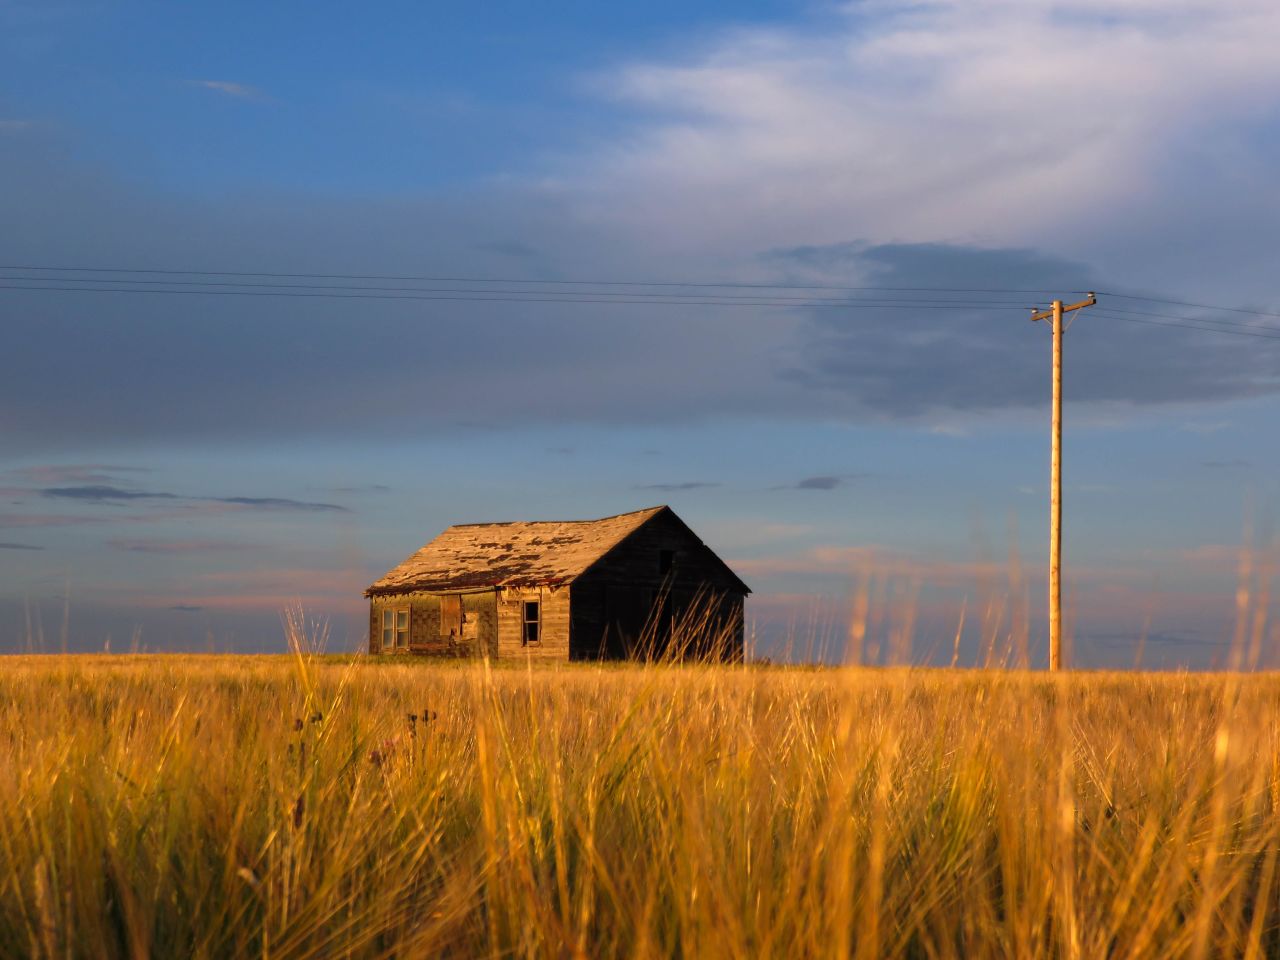 Rylan Urban noticed this old farm house about 170 kilometers east of Saskatoon, Saskatchewan. "I noticed it while driving along the highway and just HAD to stop for a photo," Urban said.